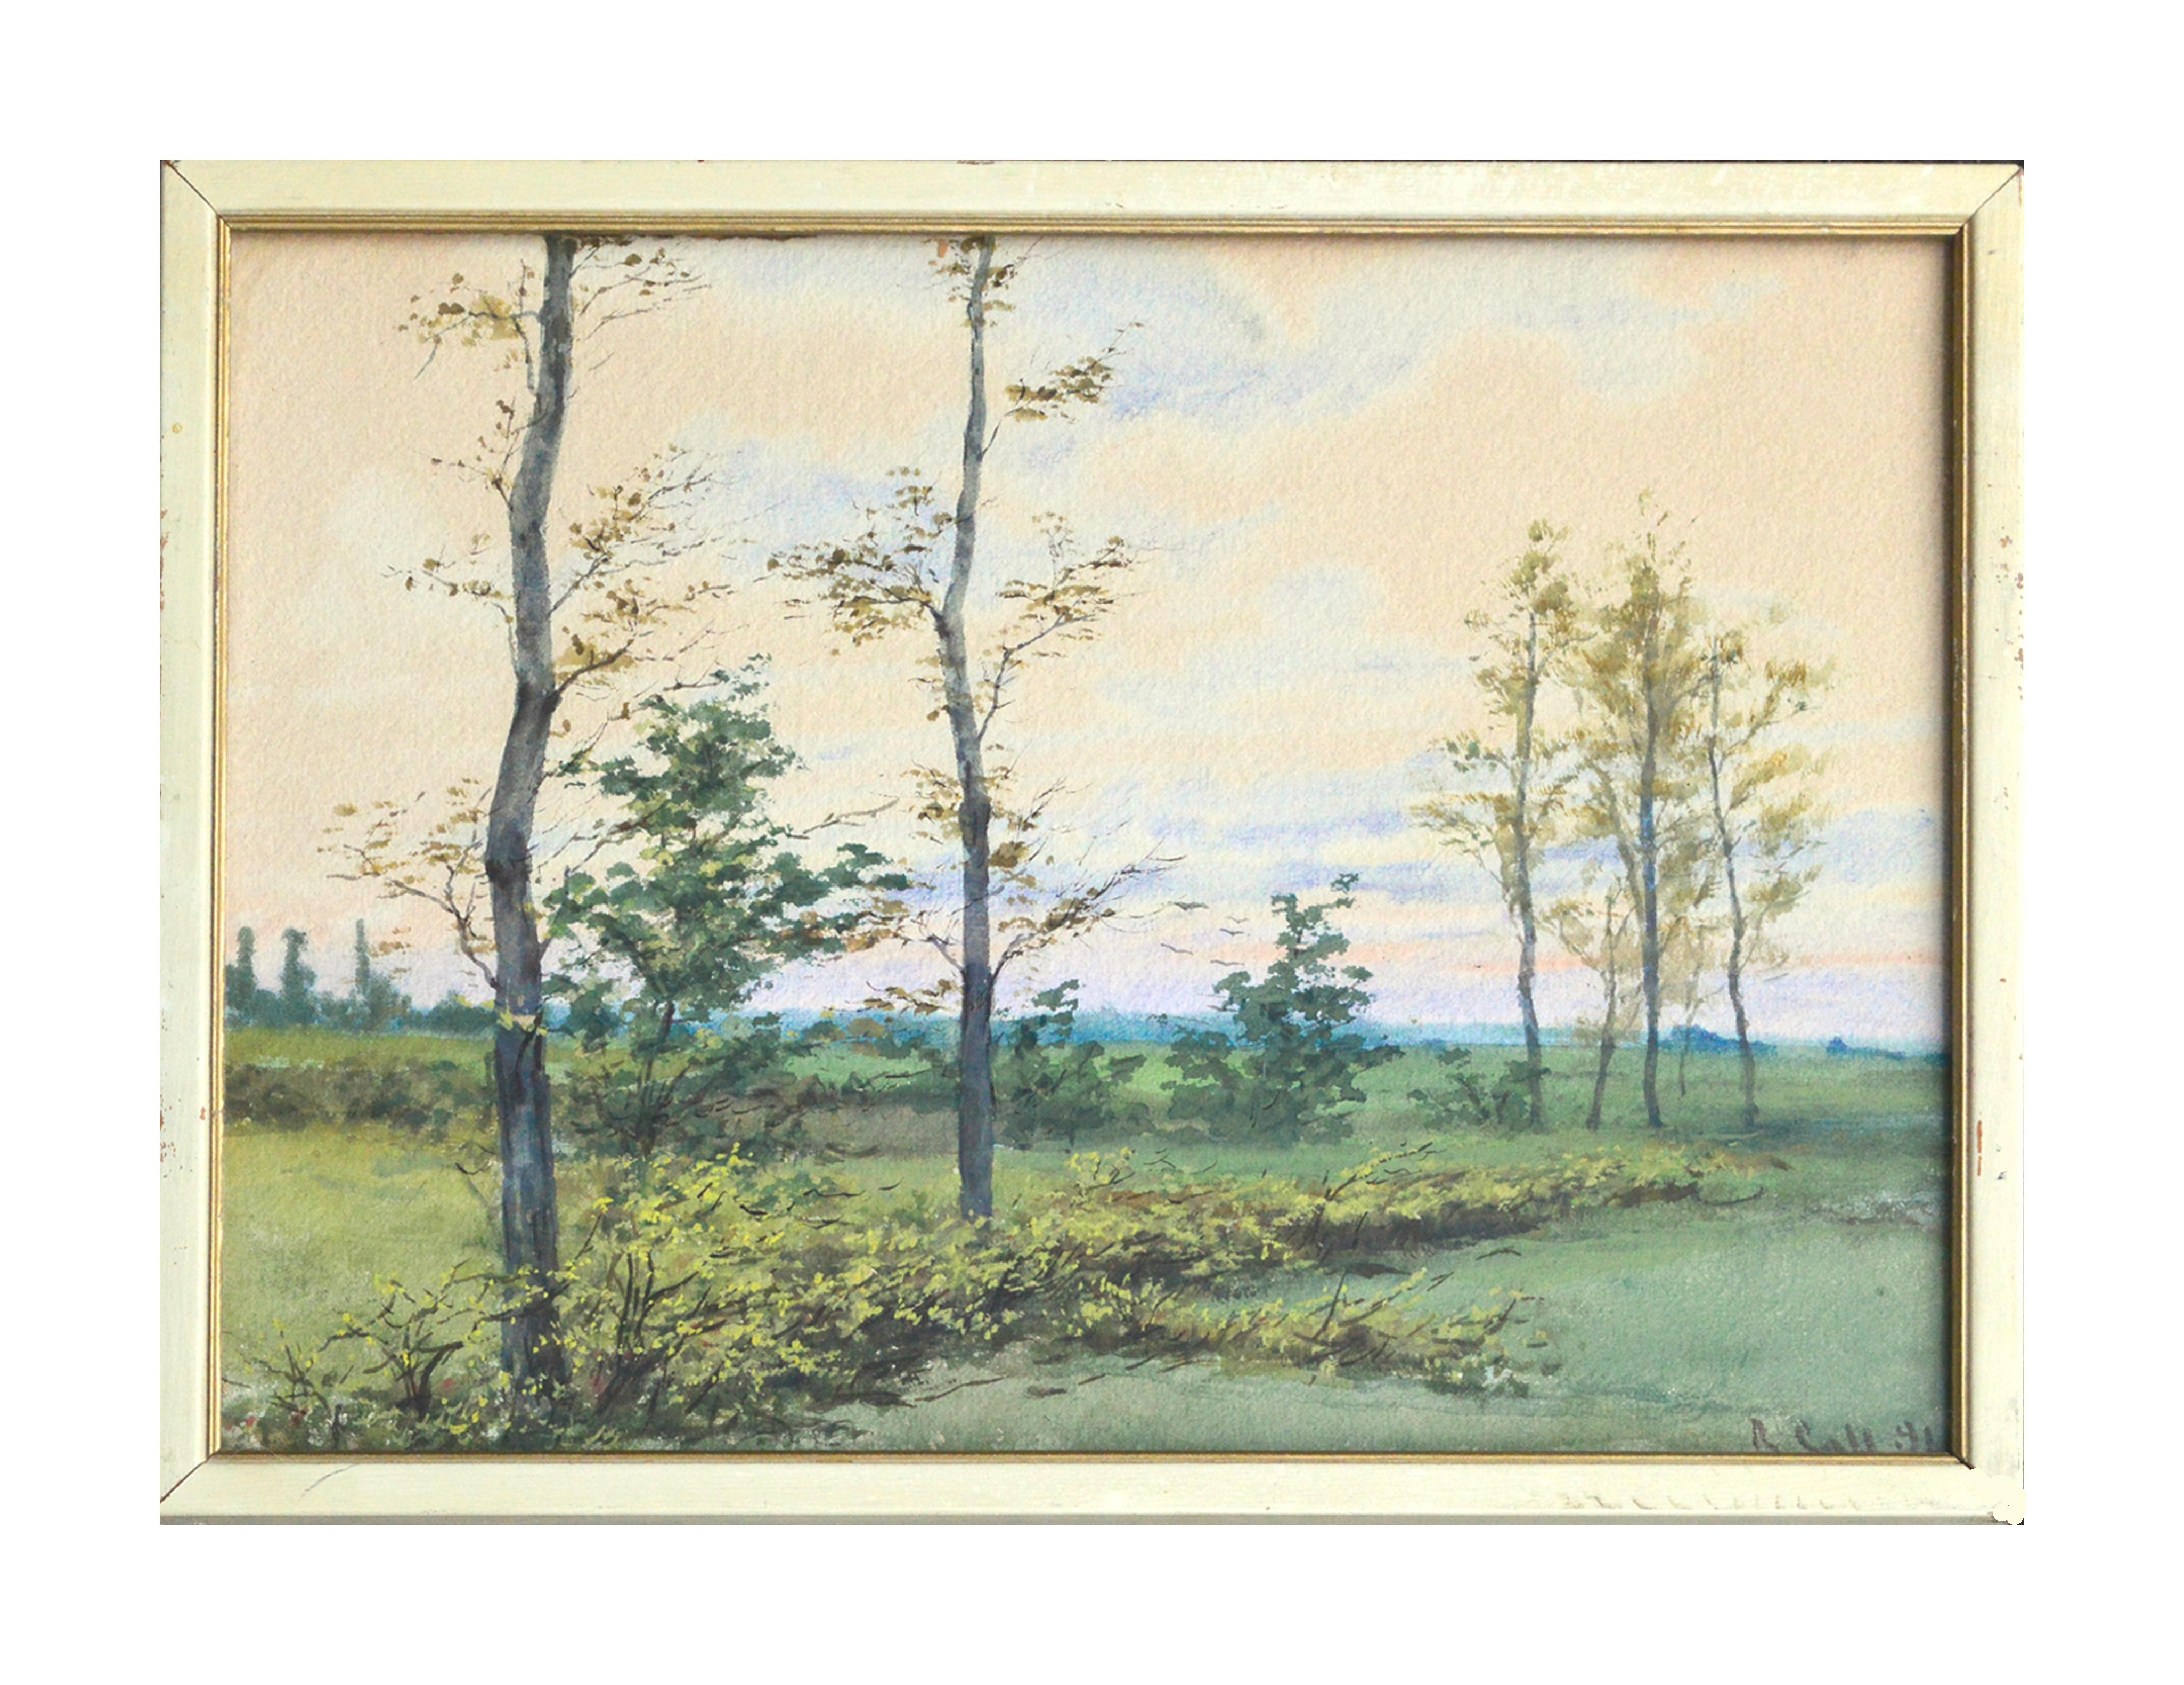 Late 19th C. River Birch Trees Landscape Pair - Art by Ramon Call 